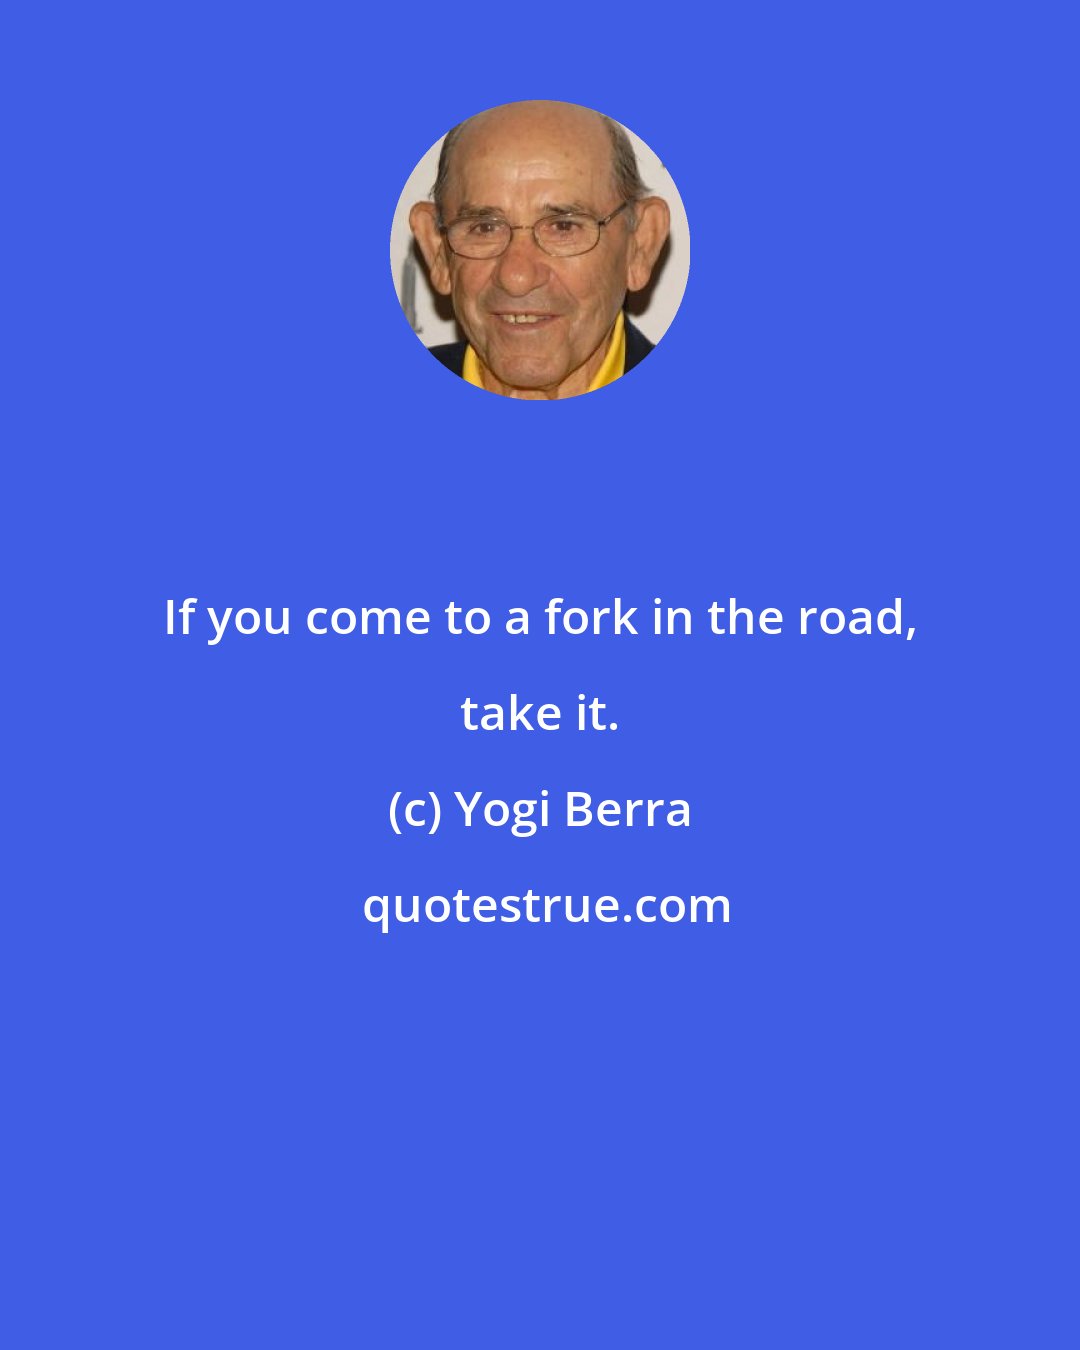 Yogi Berra: If you come to a fork in the road, take it.